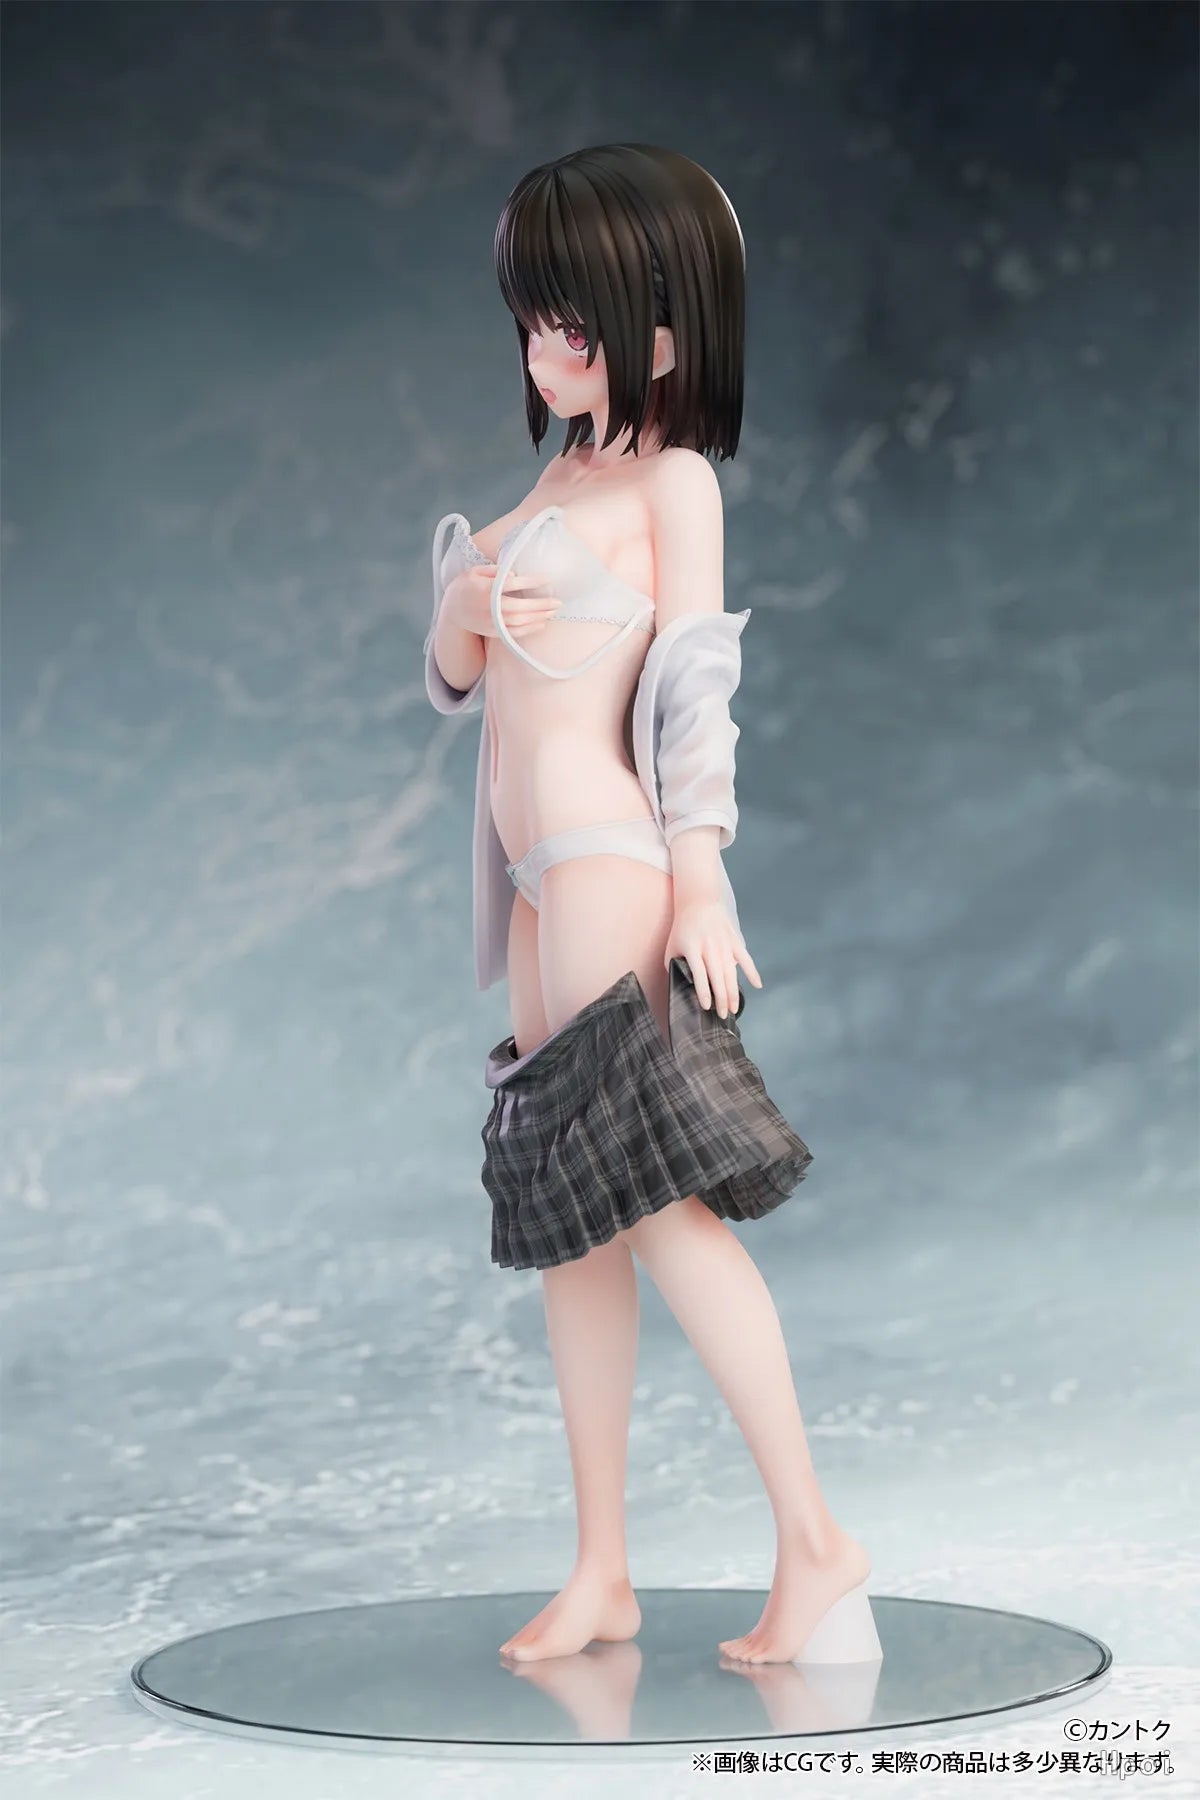 1/7 NSFW B full More Check Shizuku Anime Sexy Girl Figurine PVC Action Figure Toy Adults Collection kawaii cute Model Doll gifts